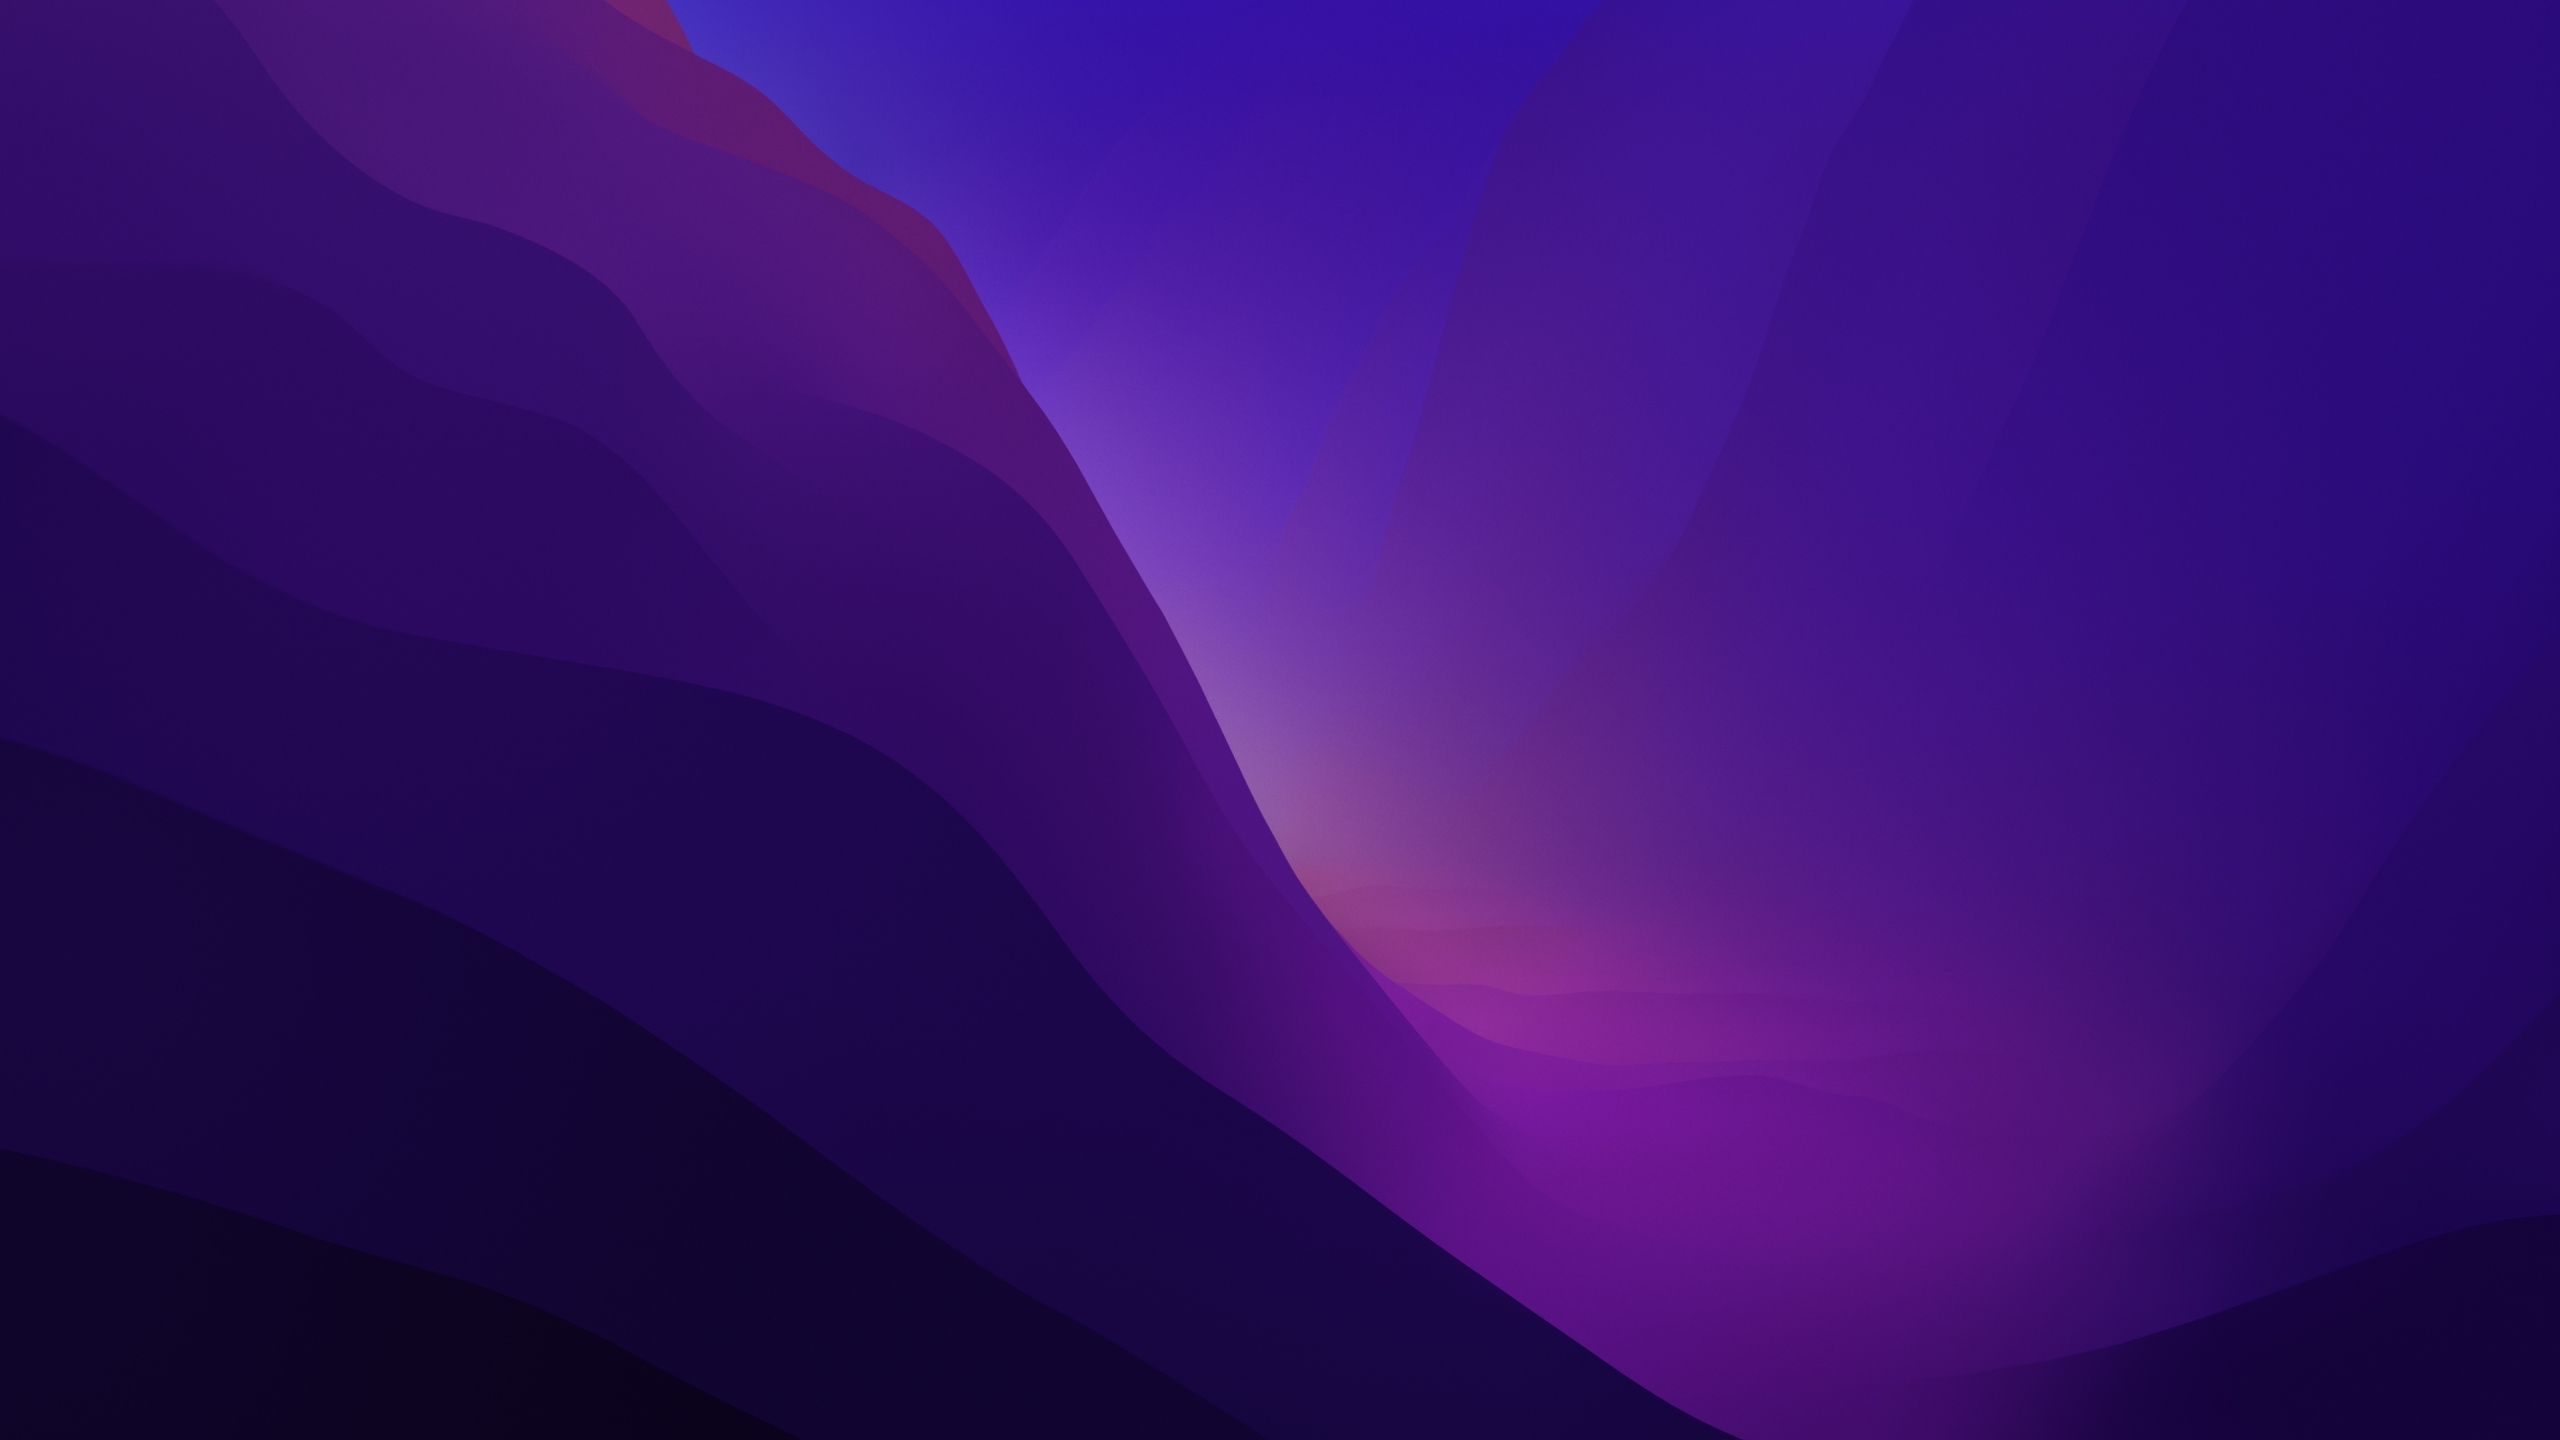 Top 50 Purple background wallpaper 2560x1440 For your computer background